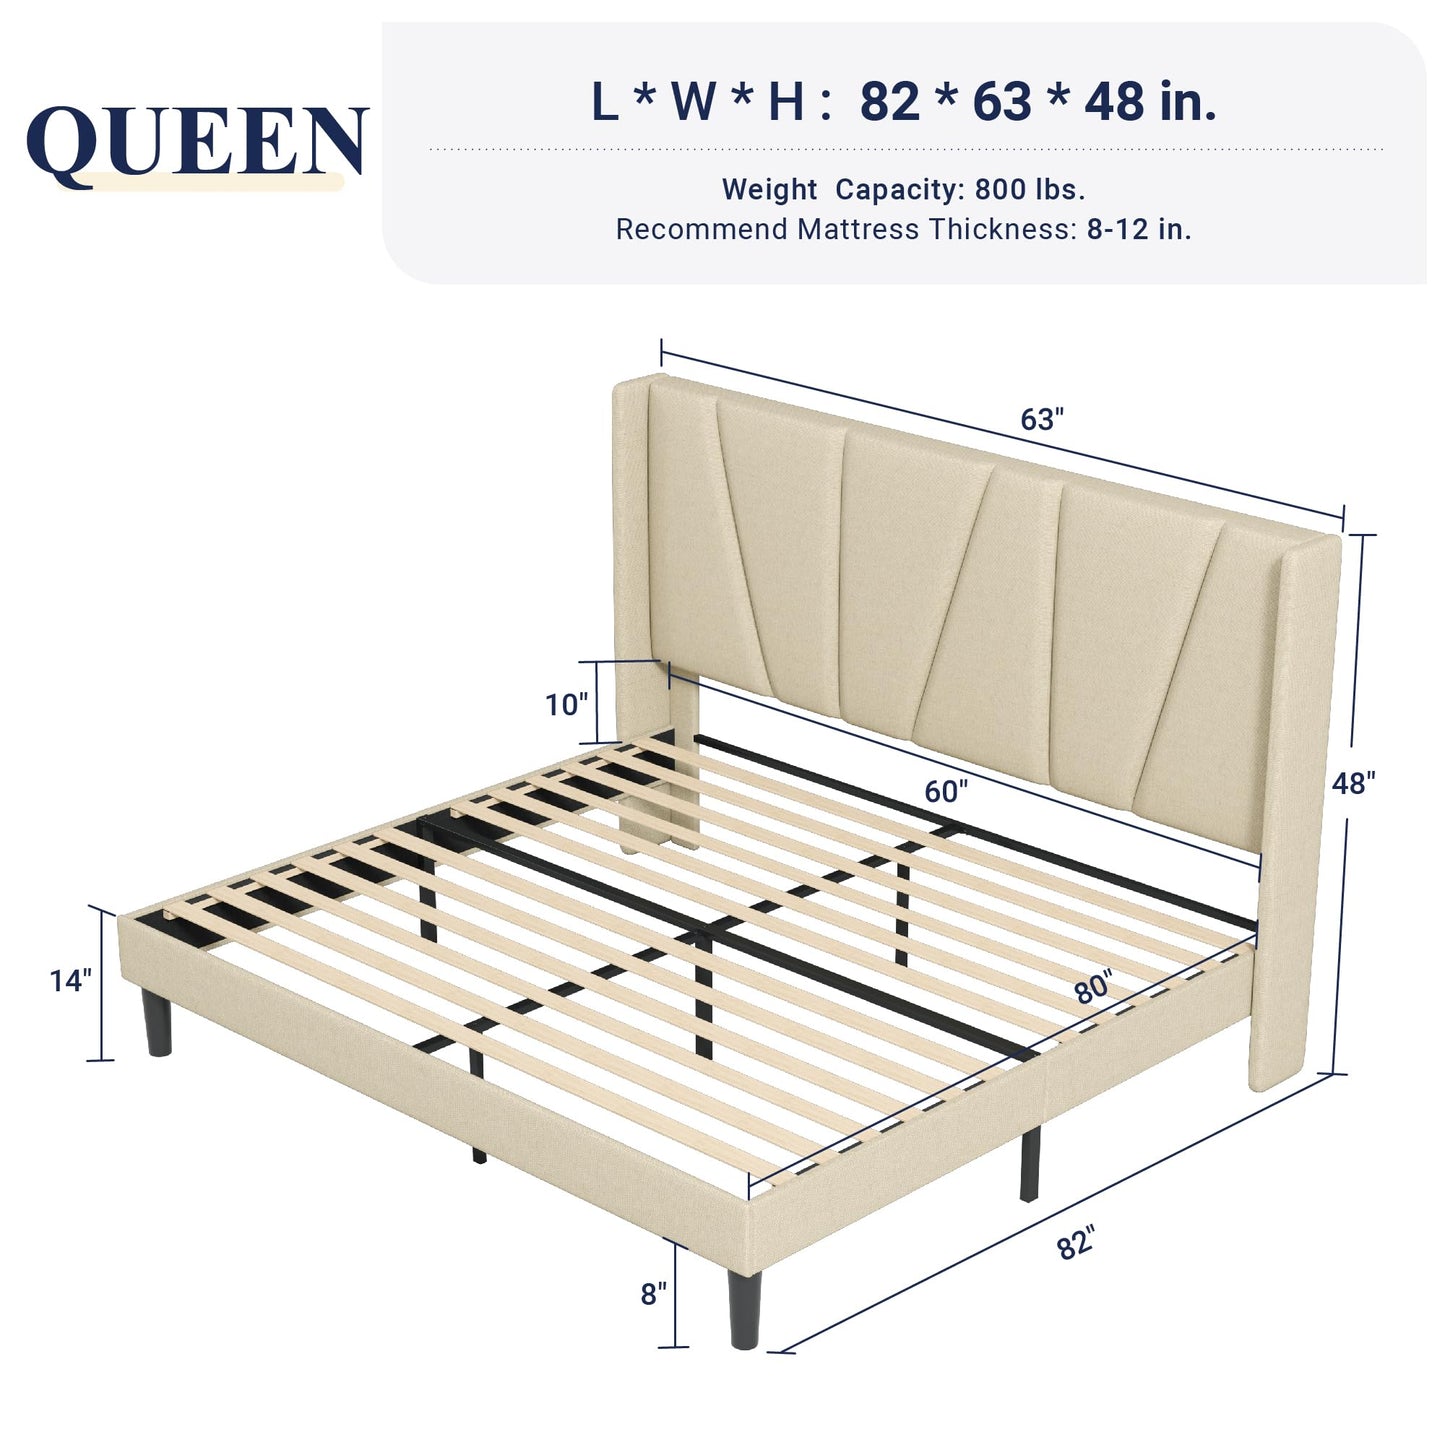 Allewie Queen Size Platform Bed Frame with Geometric Wingback Headboard, Modern Upholstered Bed with Wooden Slats Support, No Box Spring Needed, Easy Assembly, Beige